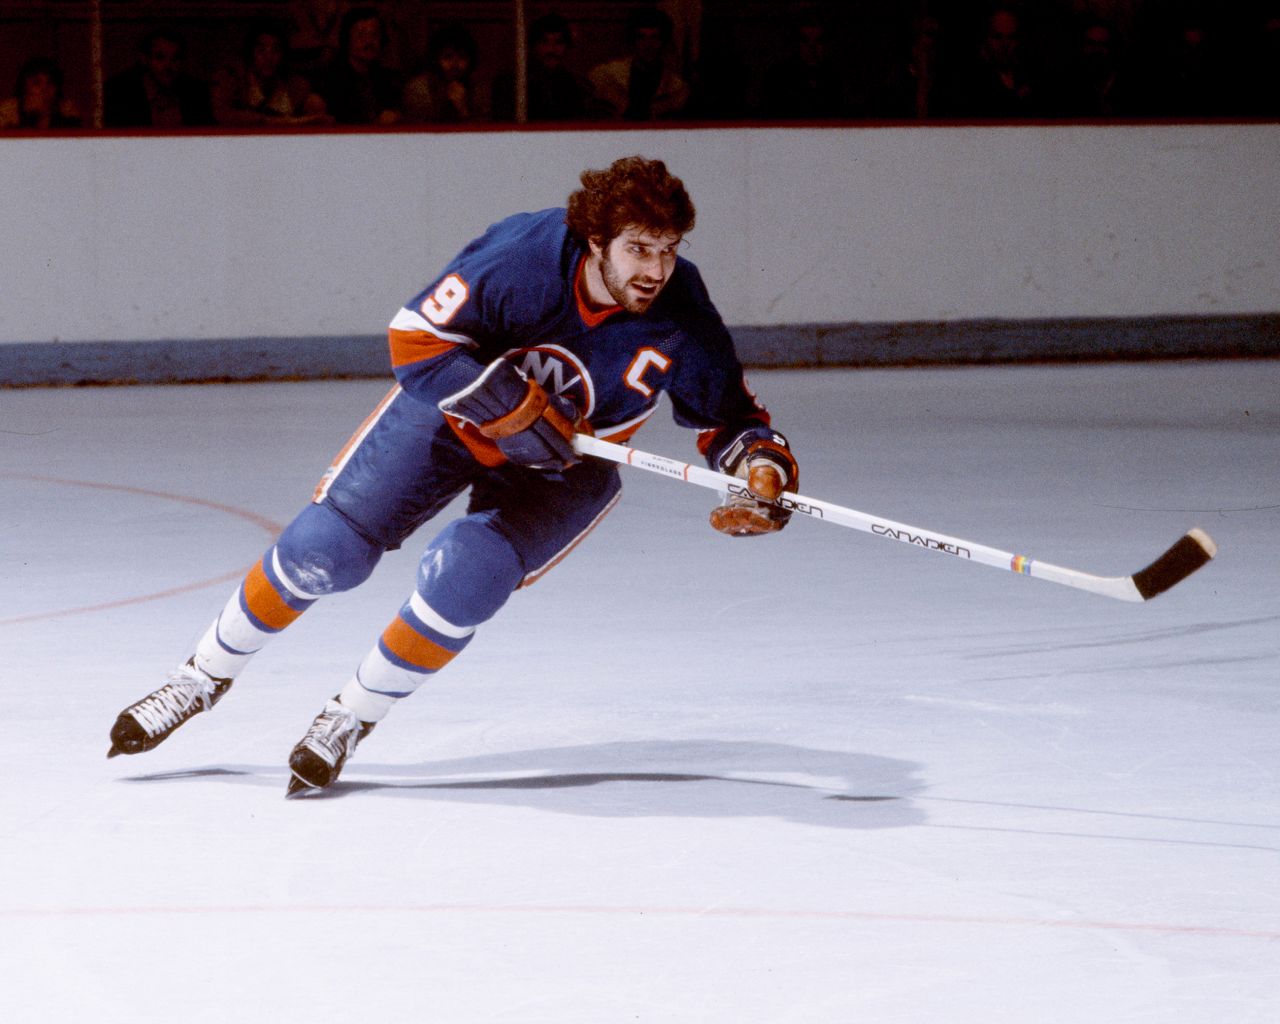 Clark Gillies, a Hall of Fame hockey player and four-time Stanley Cup winner with the New York Islanders, died on January 21, according to the National Hockey League. He was 67.